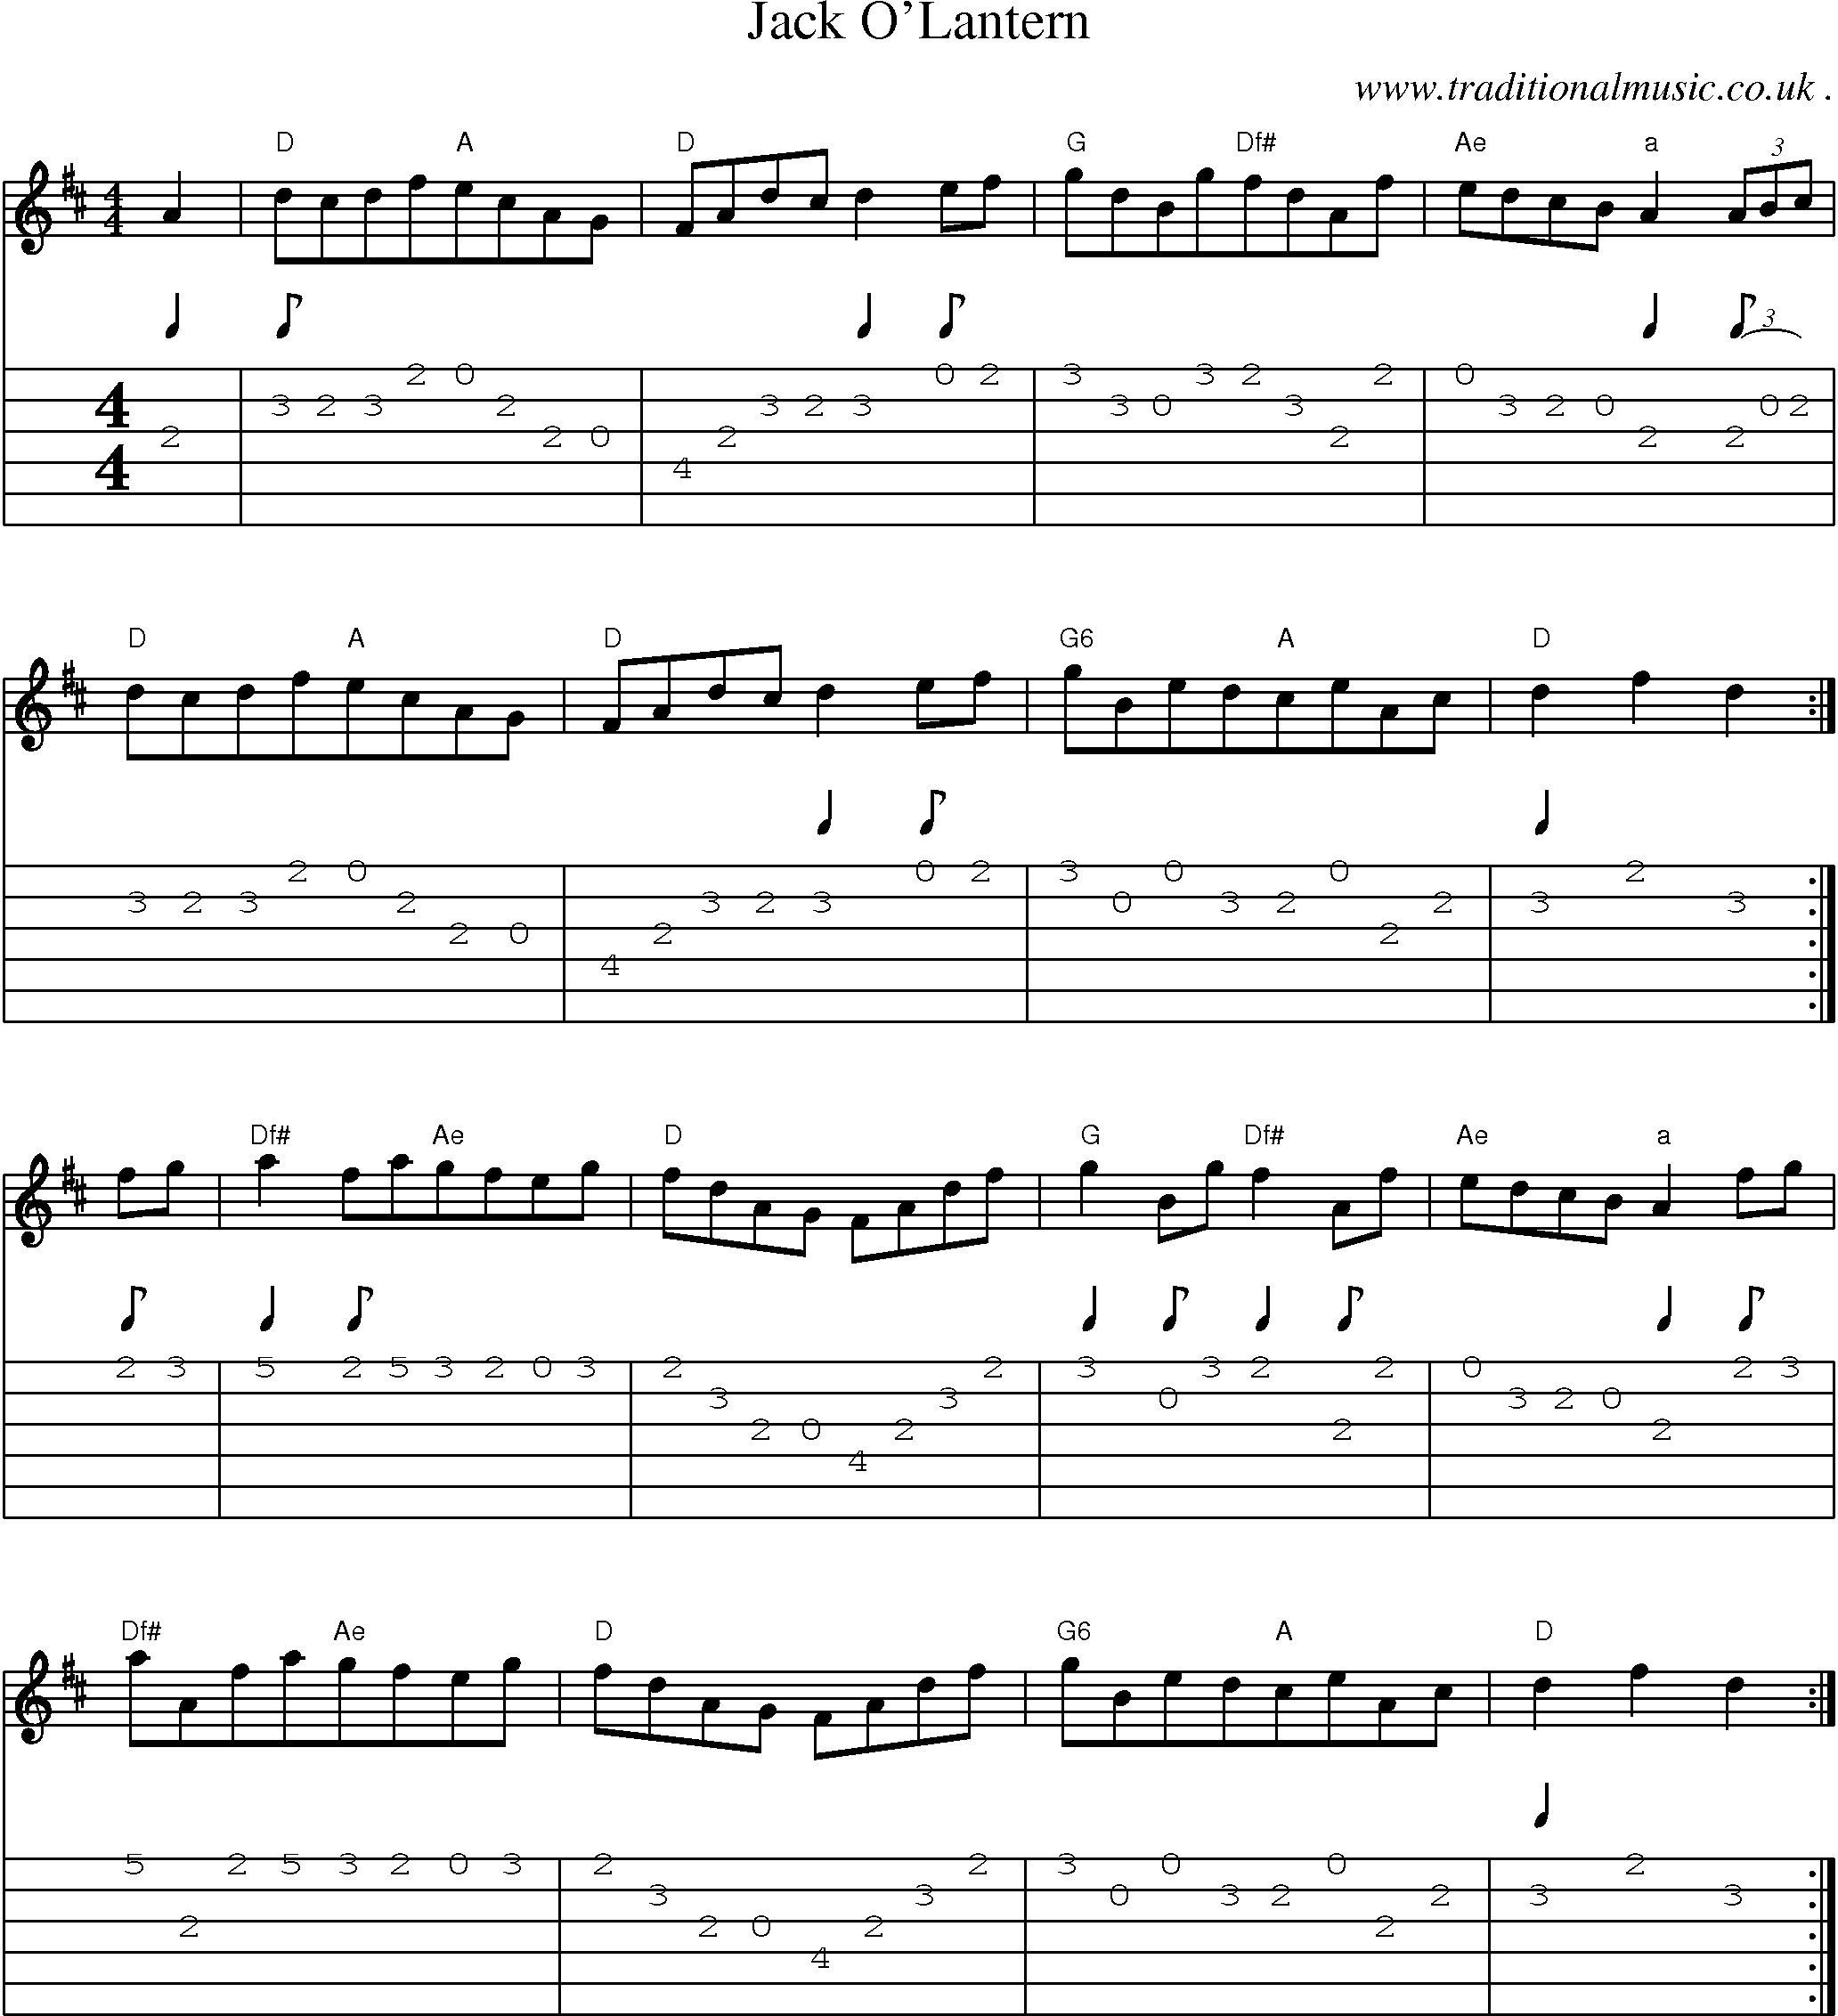 Sheet-Music and Guitar Tabs for Jack Olantern